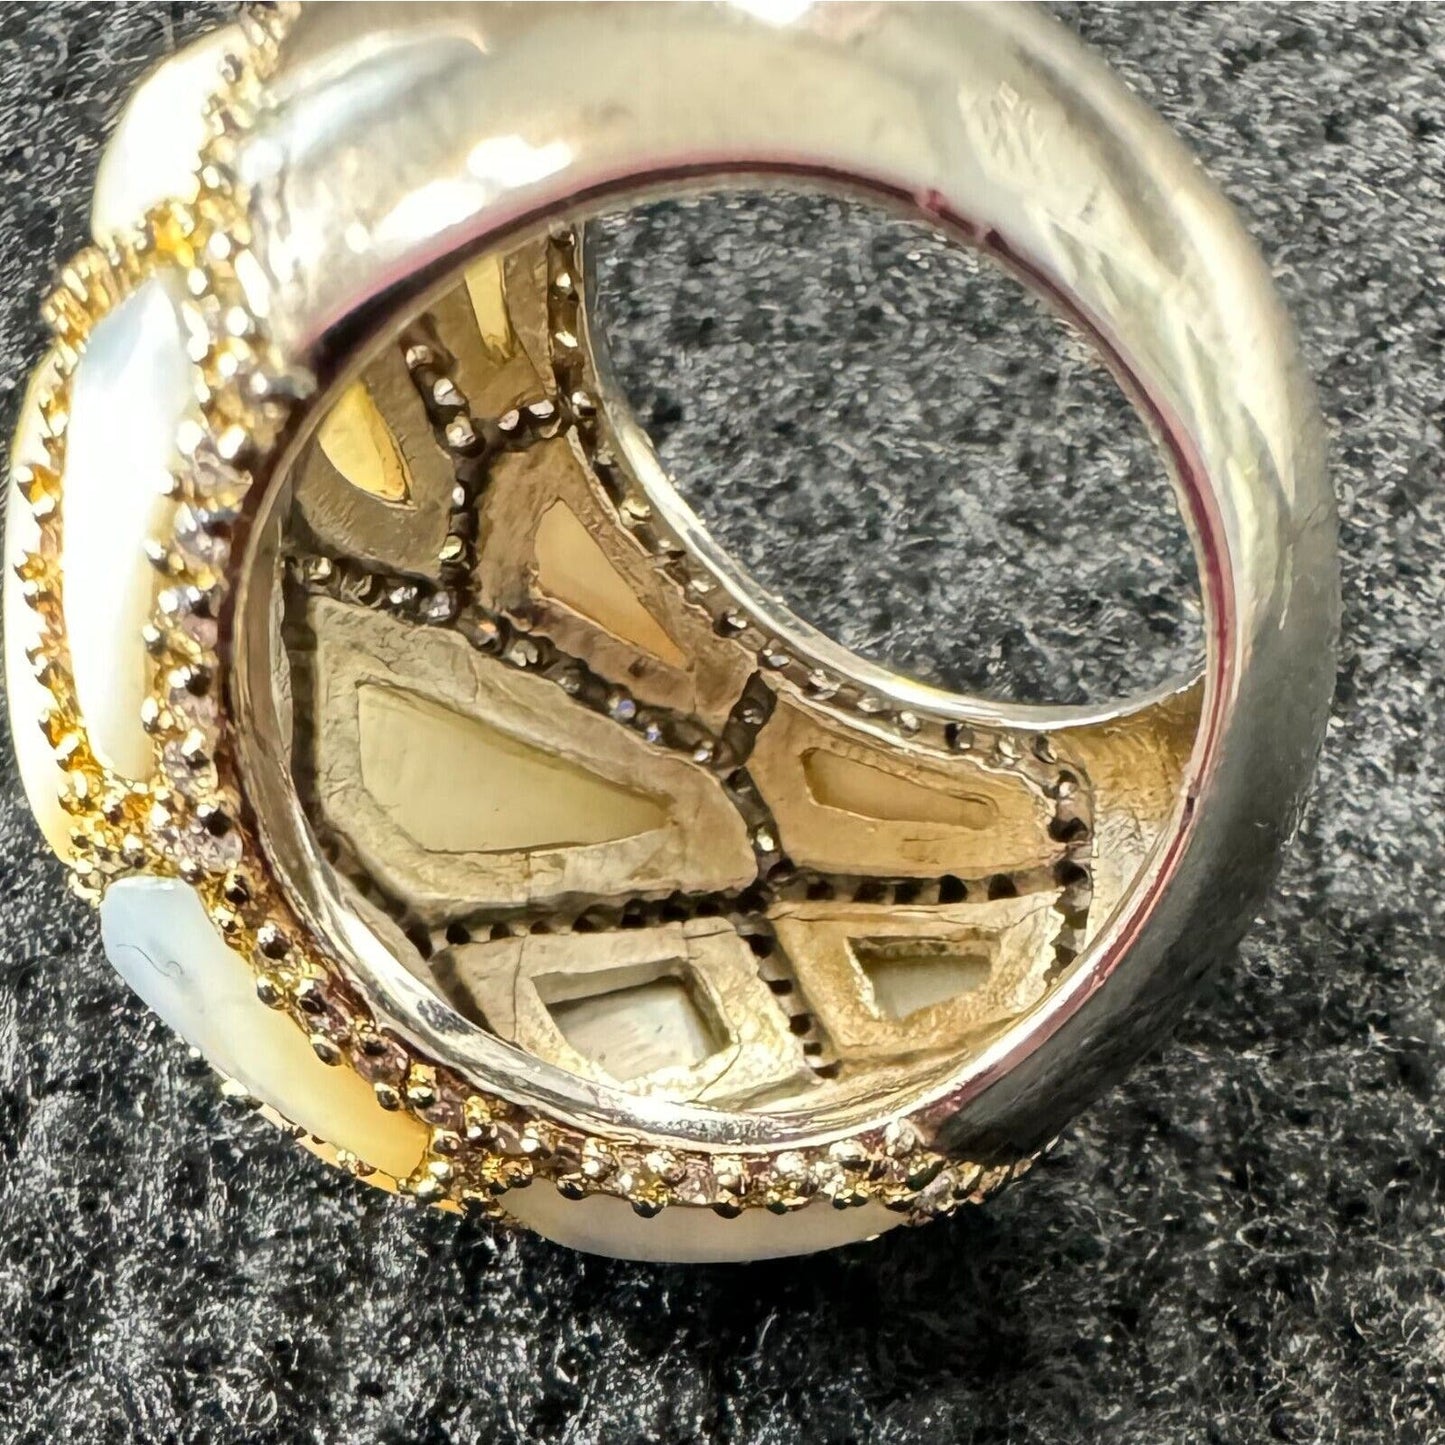 Womens Gold White Colored Cross-Hatched Rhinestones Fashion Cocktail Ring Size 9